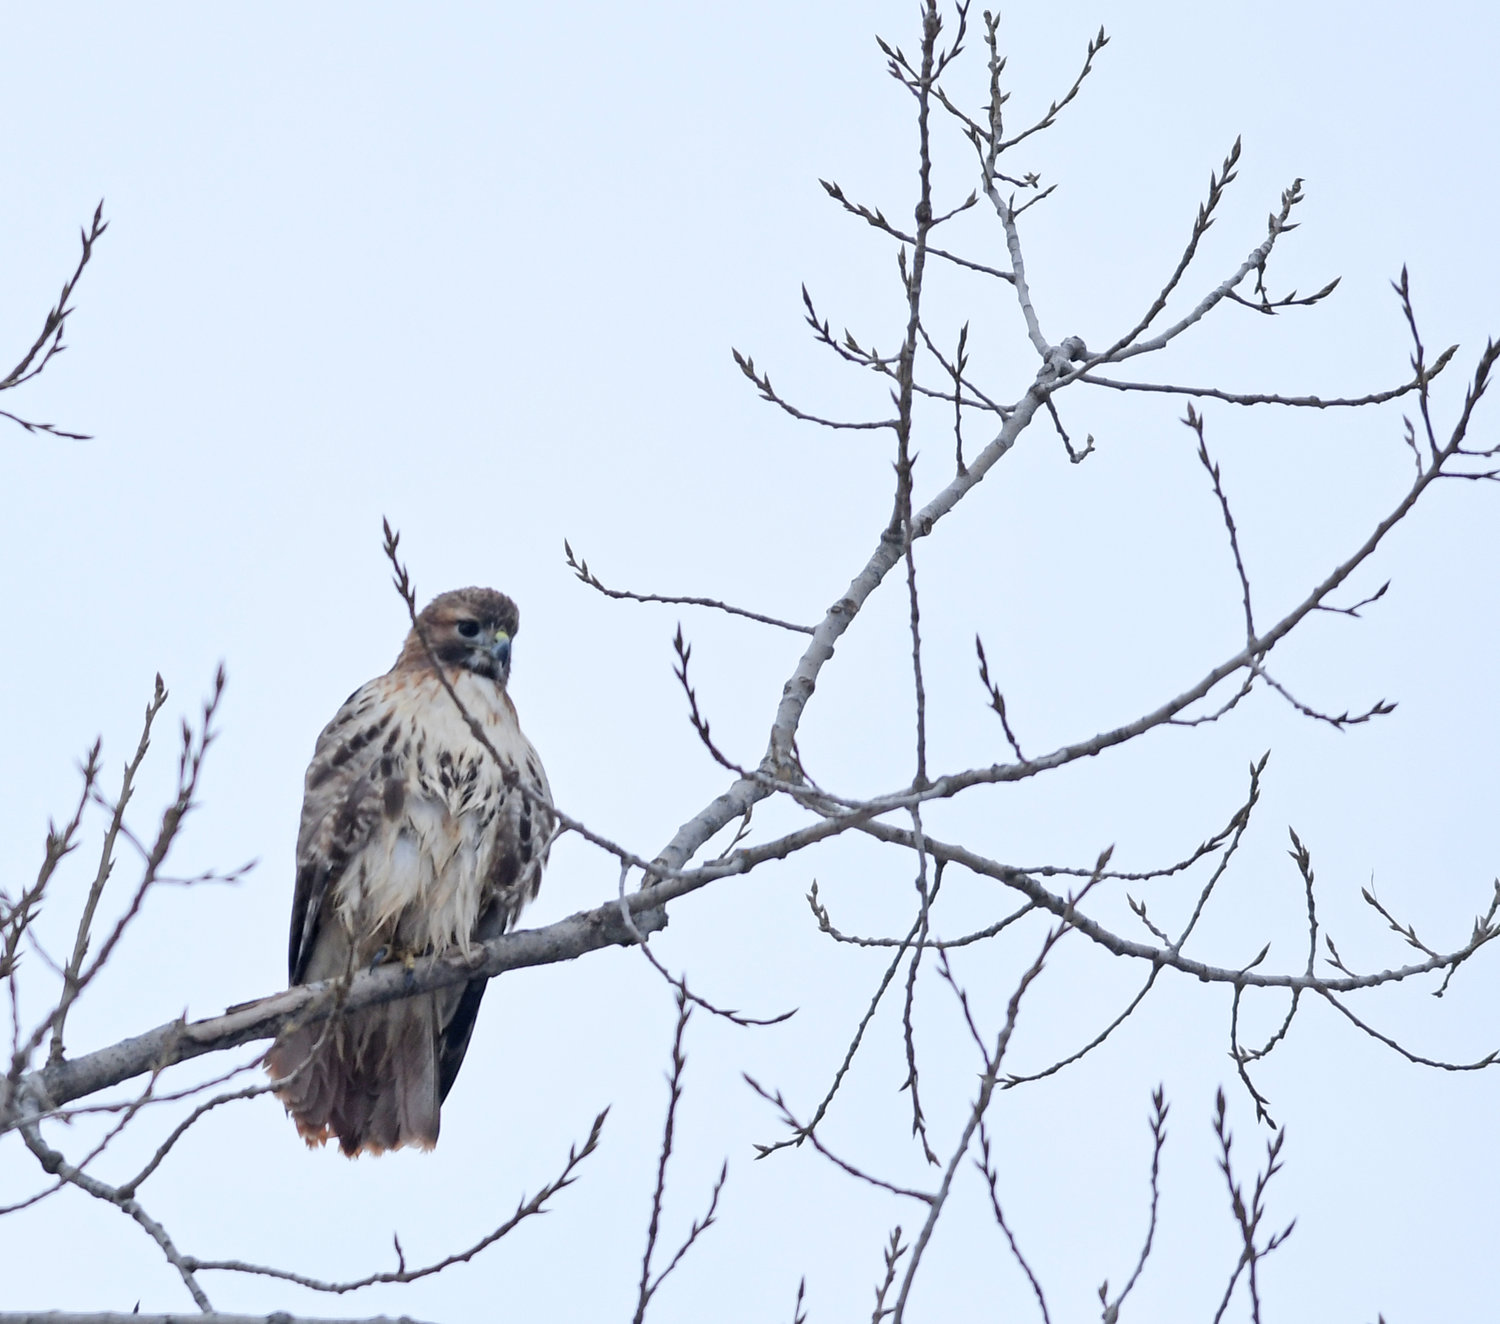 Annual bird count finds dozens of species of feathered friends in area - Rome Sentinel